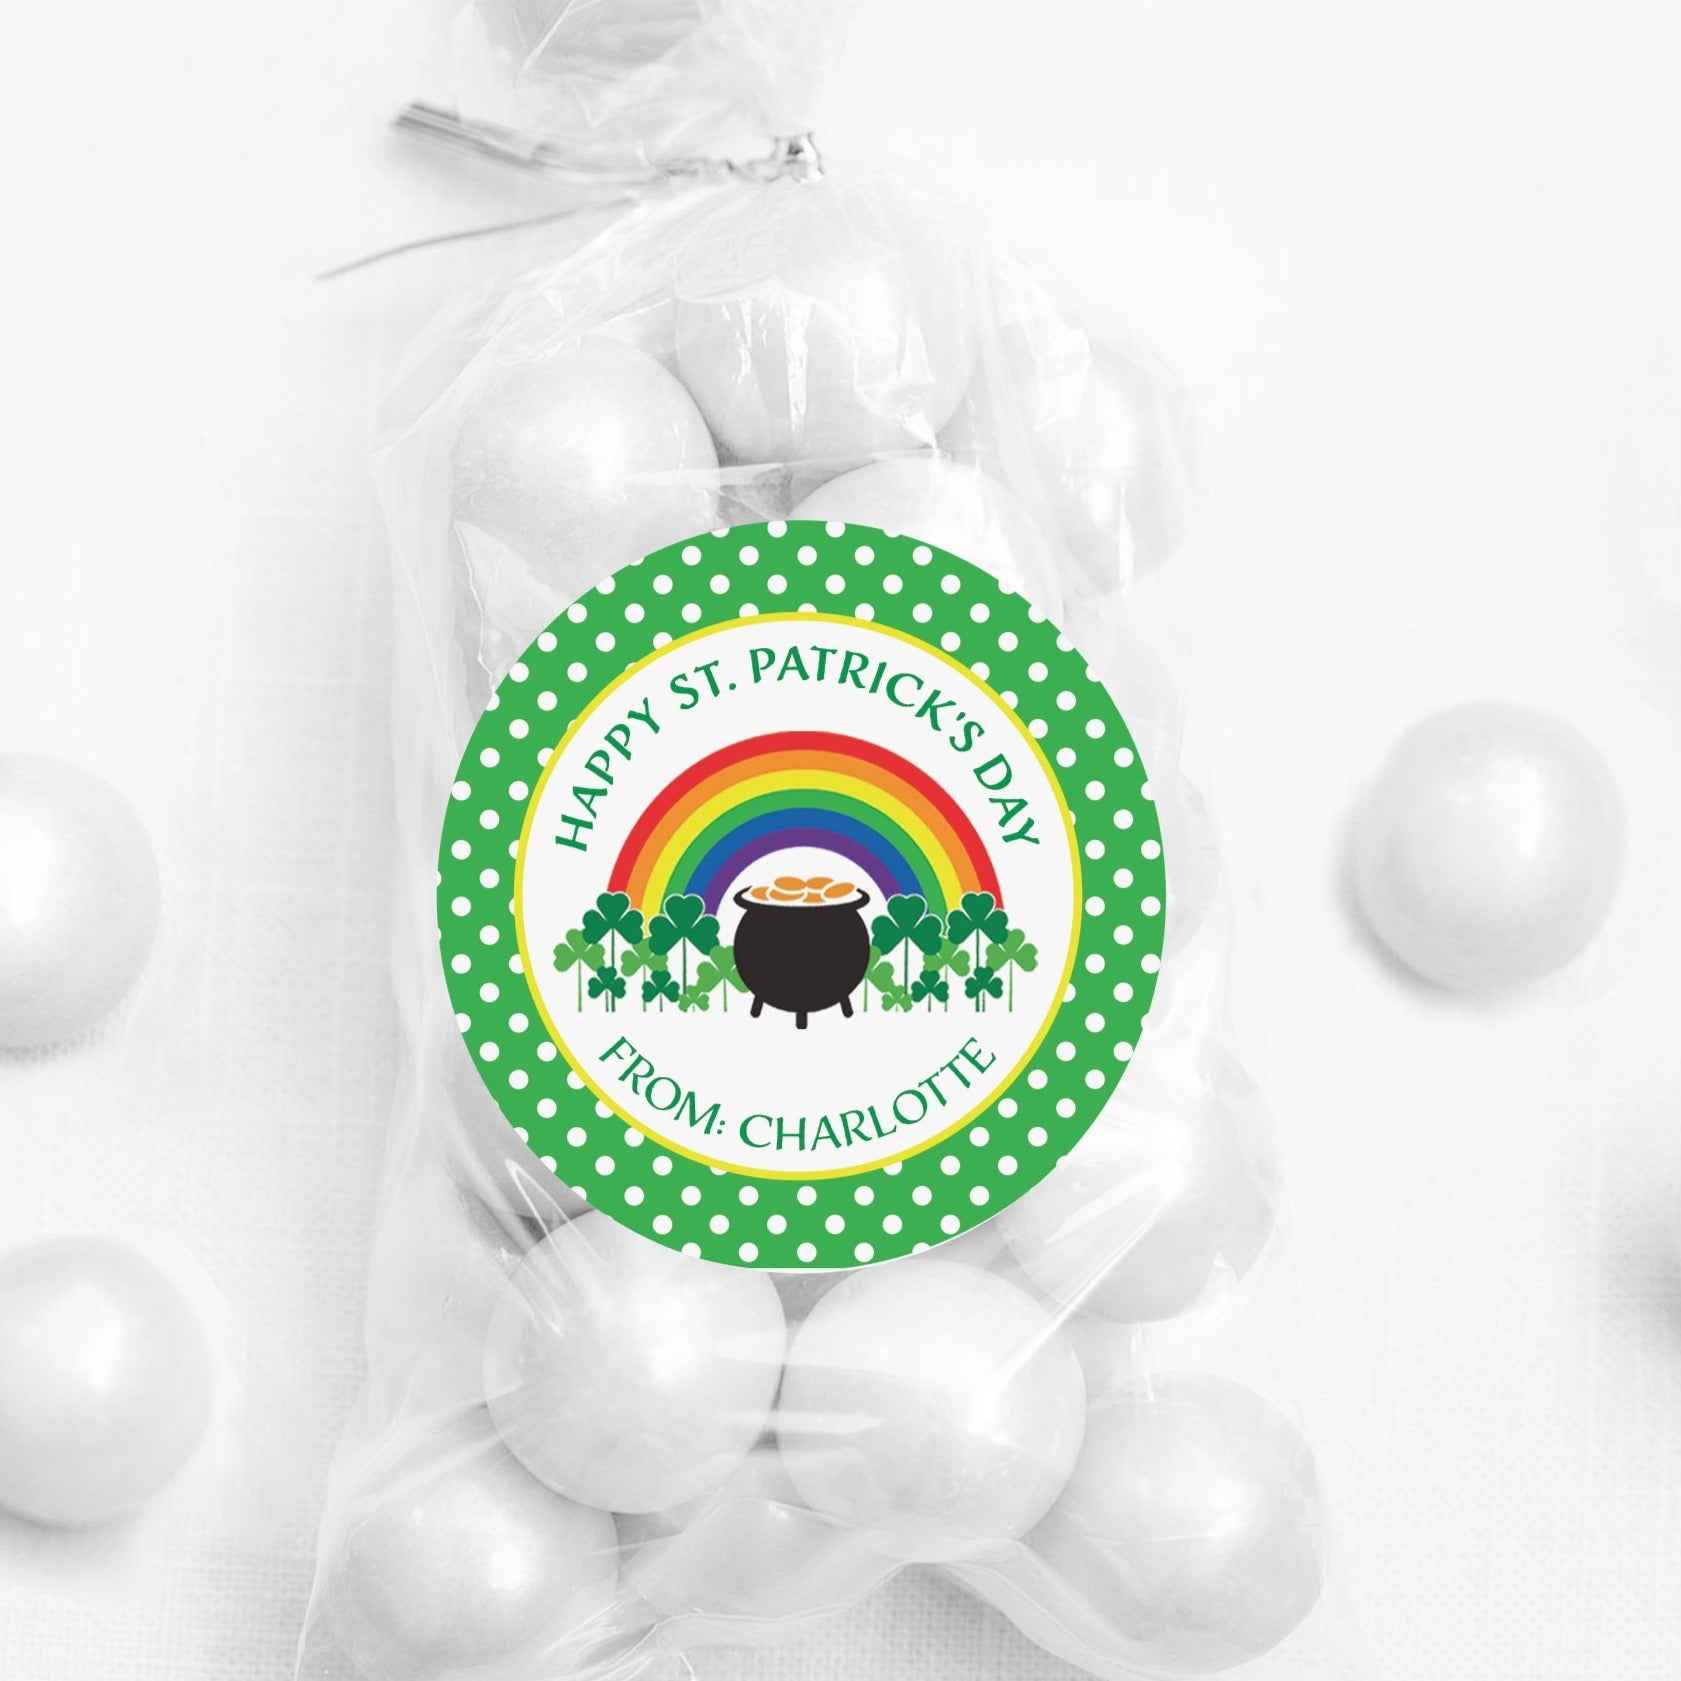 Rainbow and Pot of Gold, shamrocks, clovers, Personalized Happy St. Patrick's Day class treat bag sticker, round matte stickers, 2.5", Pipsy.com